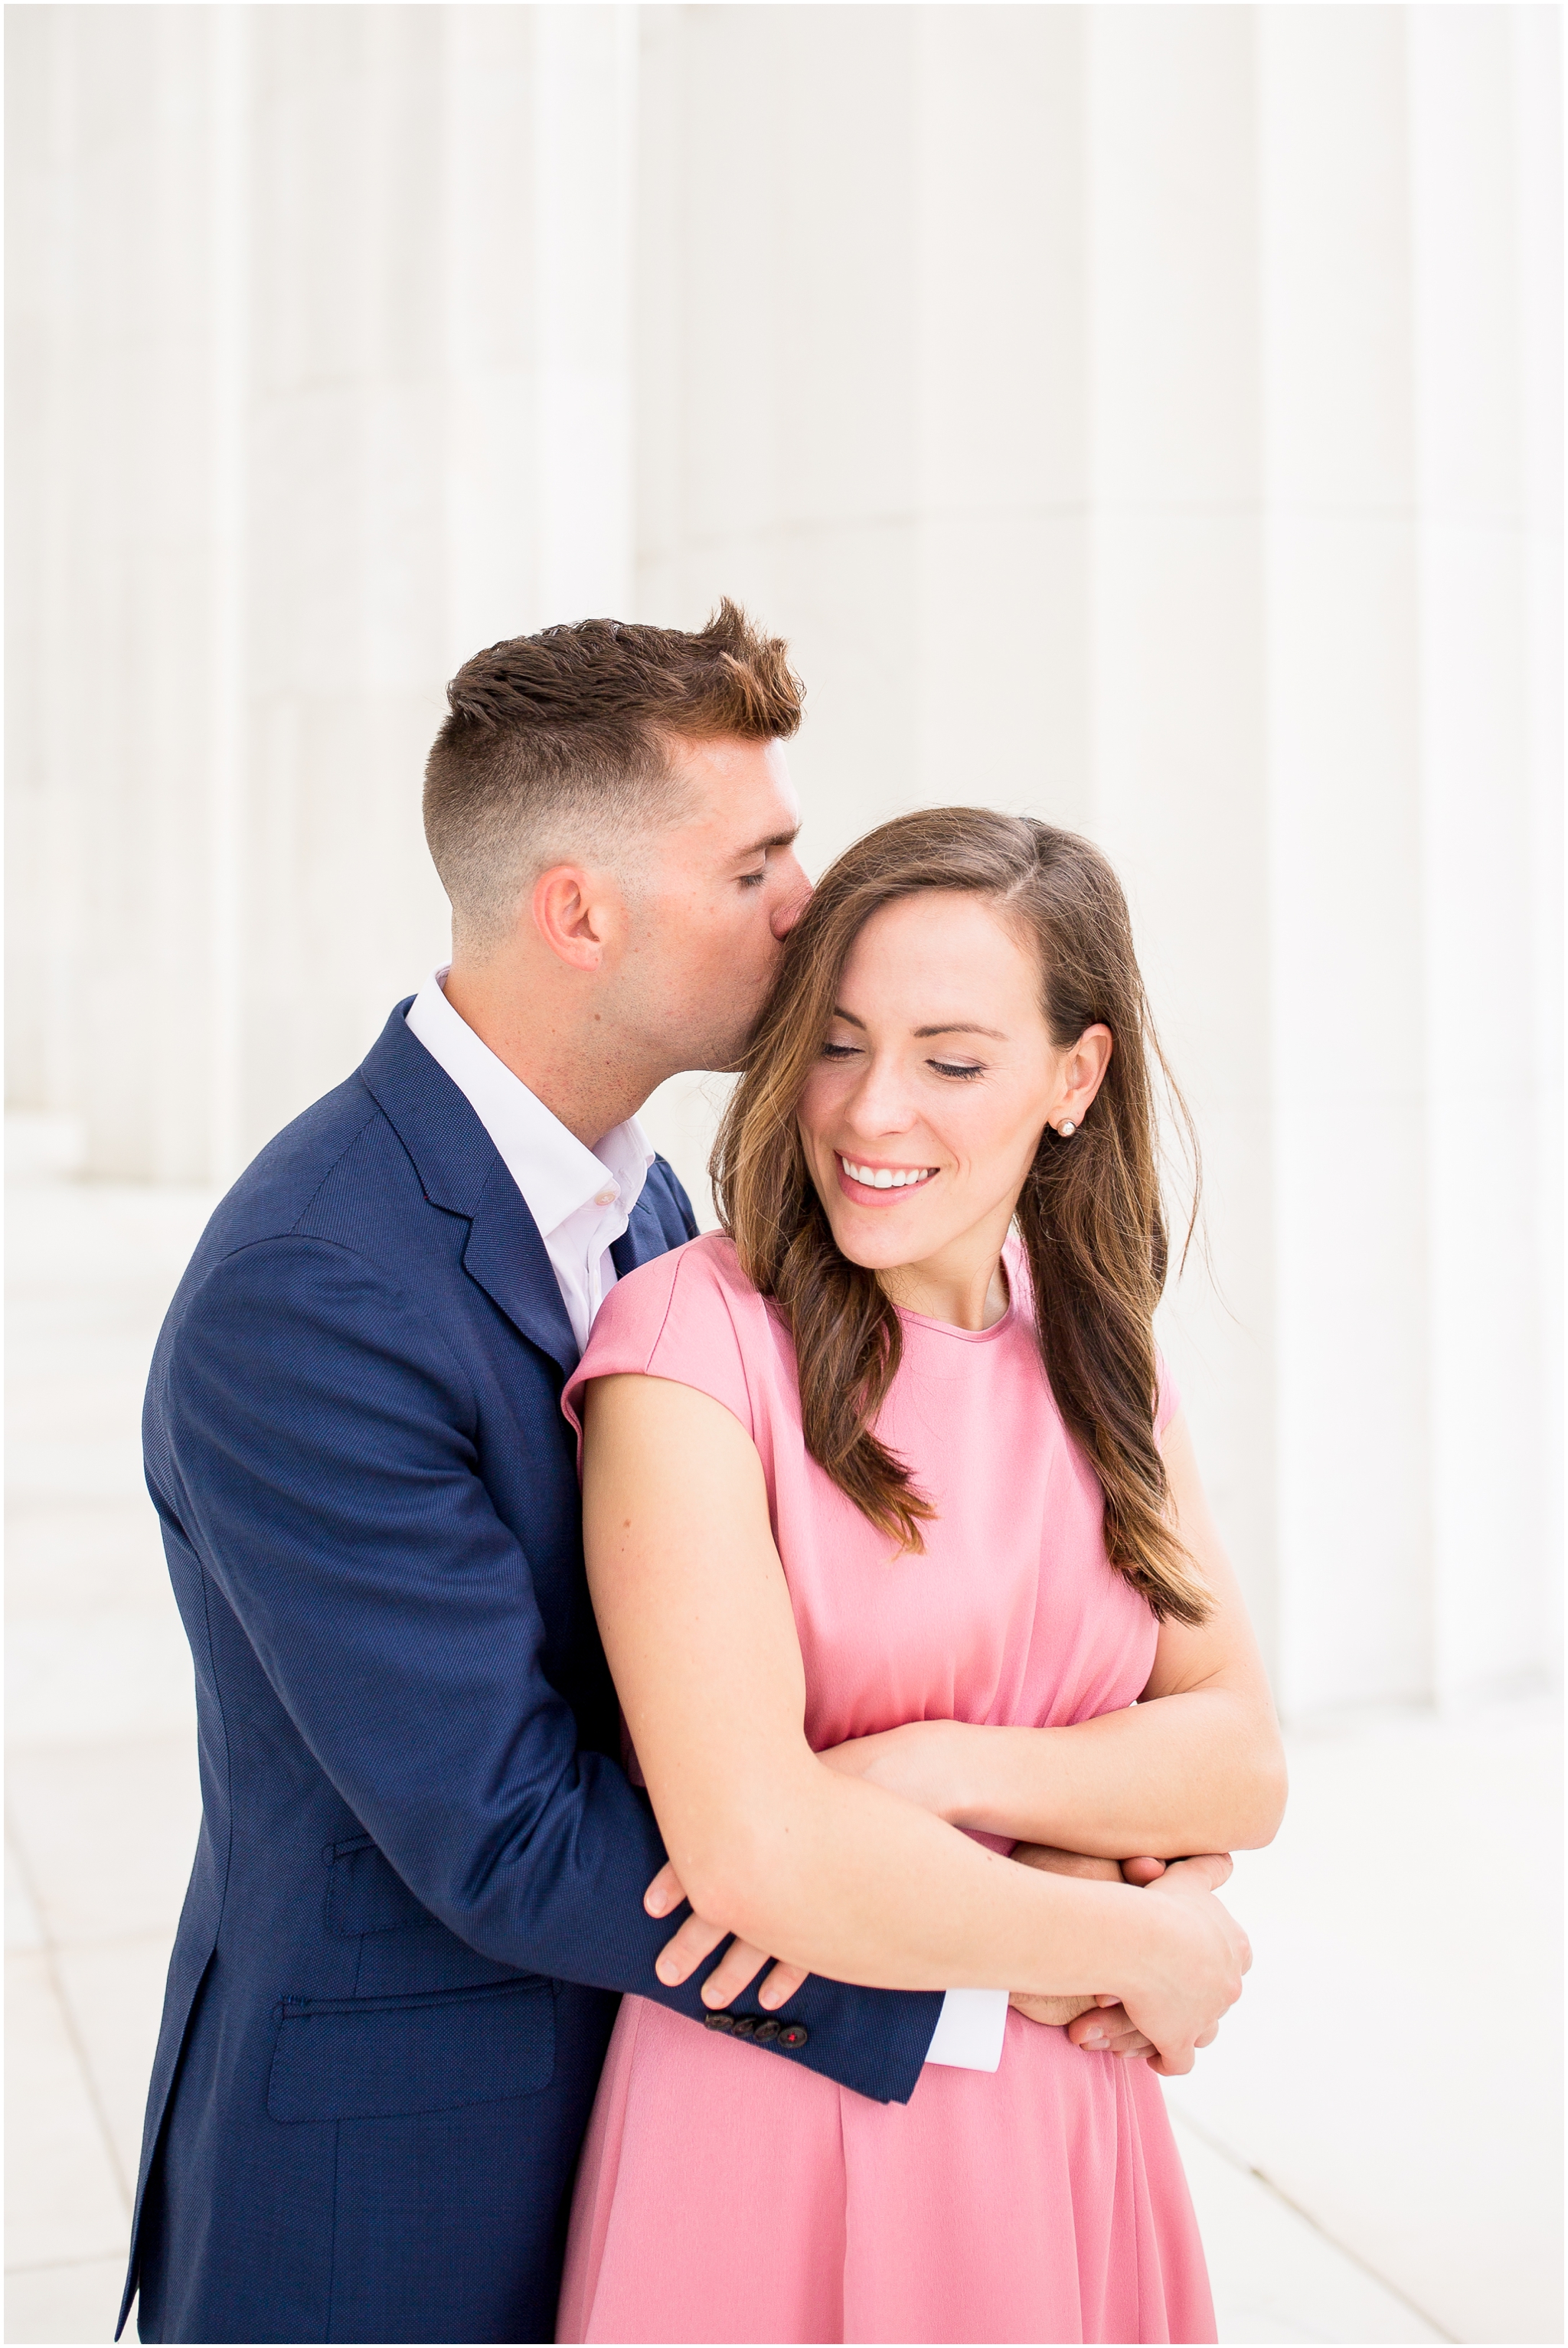 DC Wedding photographer captured a sunrise Lincoln Memorial engagement session views of the Washington Monument. This formal DC engagement session at the DC monuments was captured by DC engagement photographer Taylor Rose Photography. Kate’s engagement session outfit inspiration came from Gal Meets Glam.